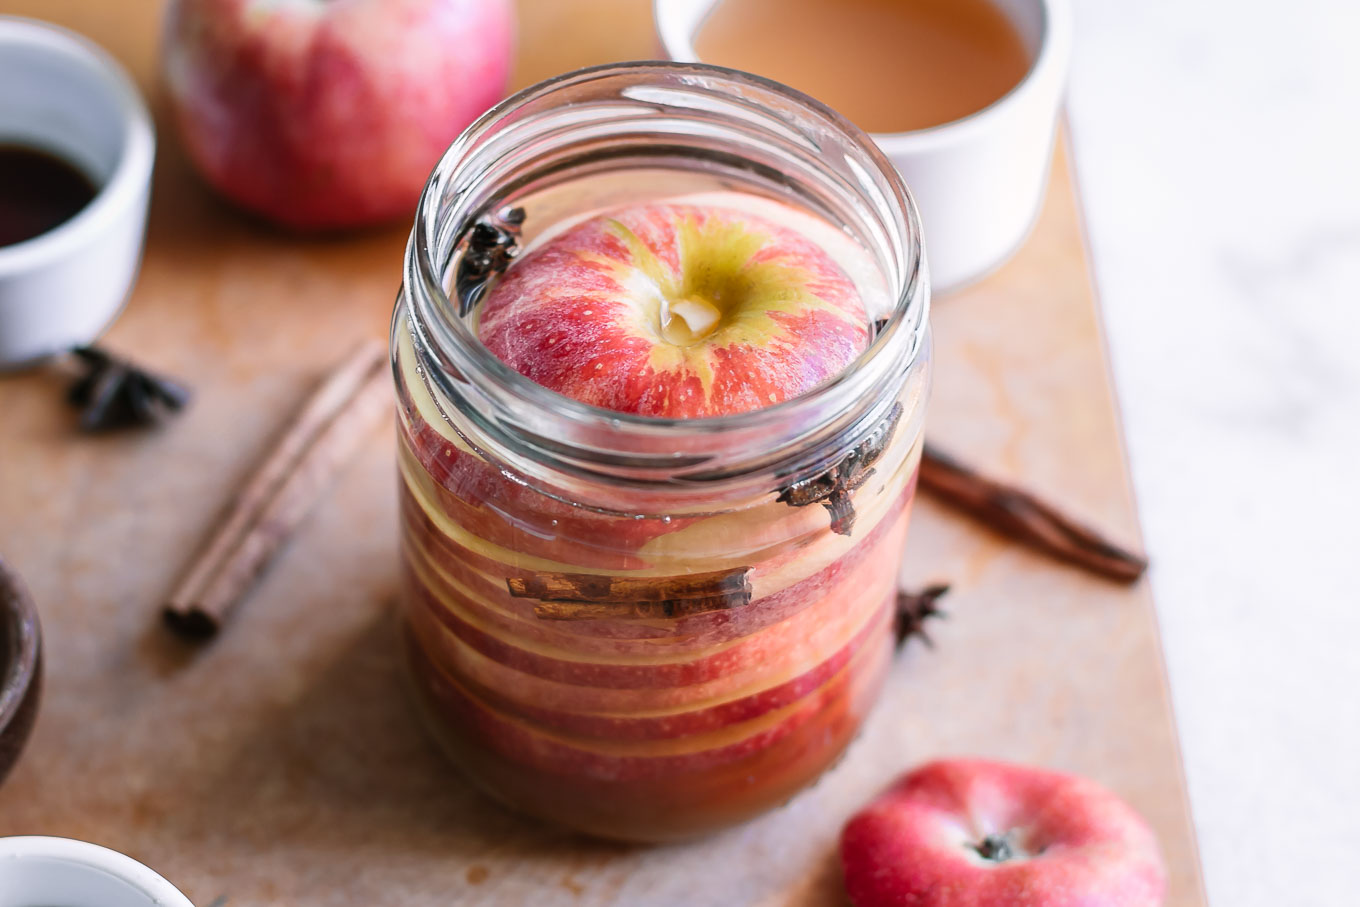 pickled apples in a jar with cinnamon sticks and star anise